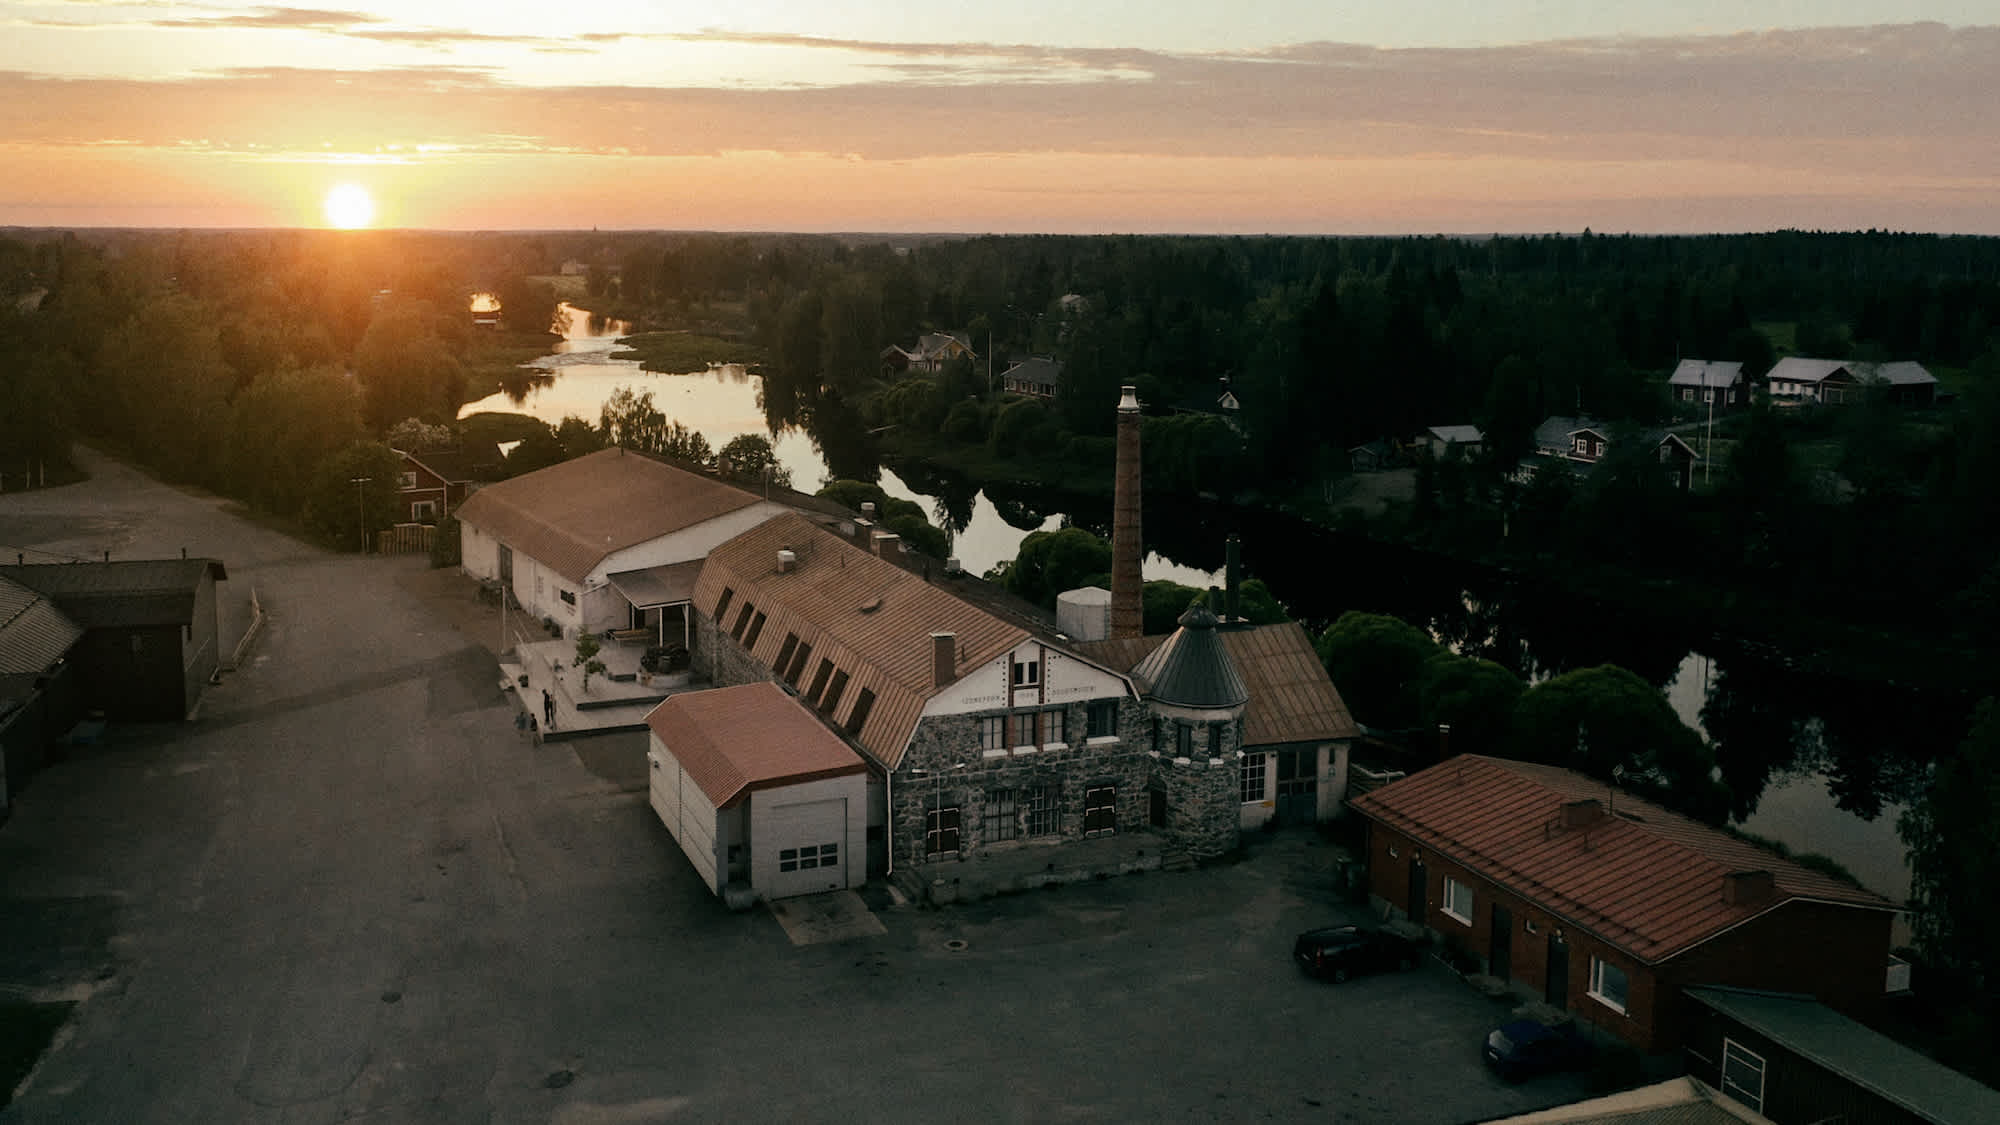 Image of Kyrö Distillery from above during sunset.